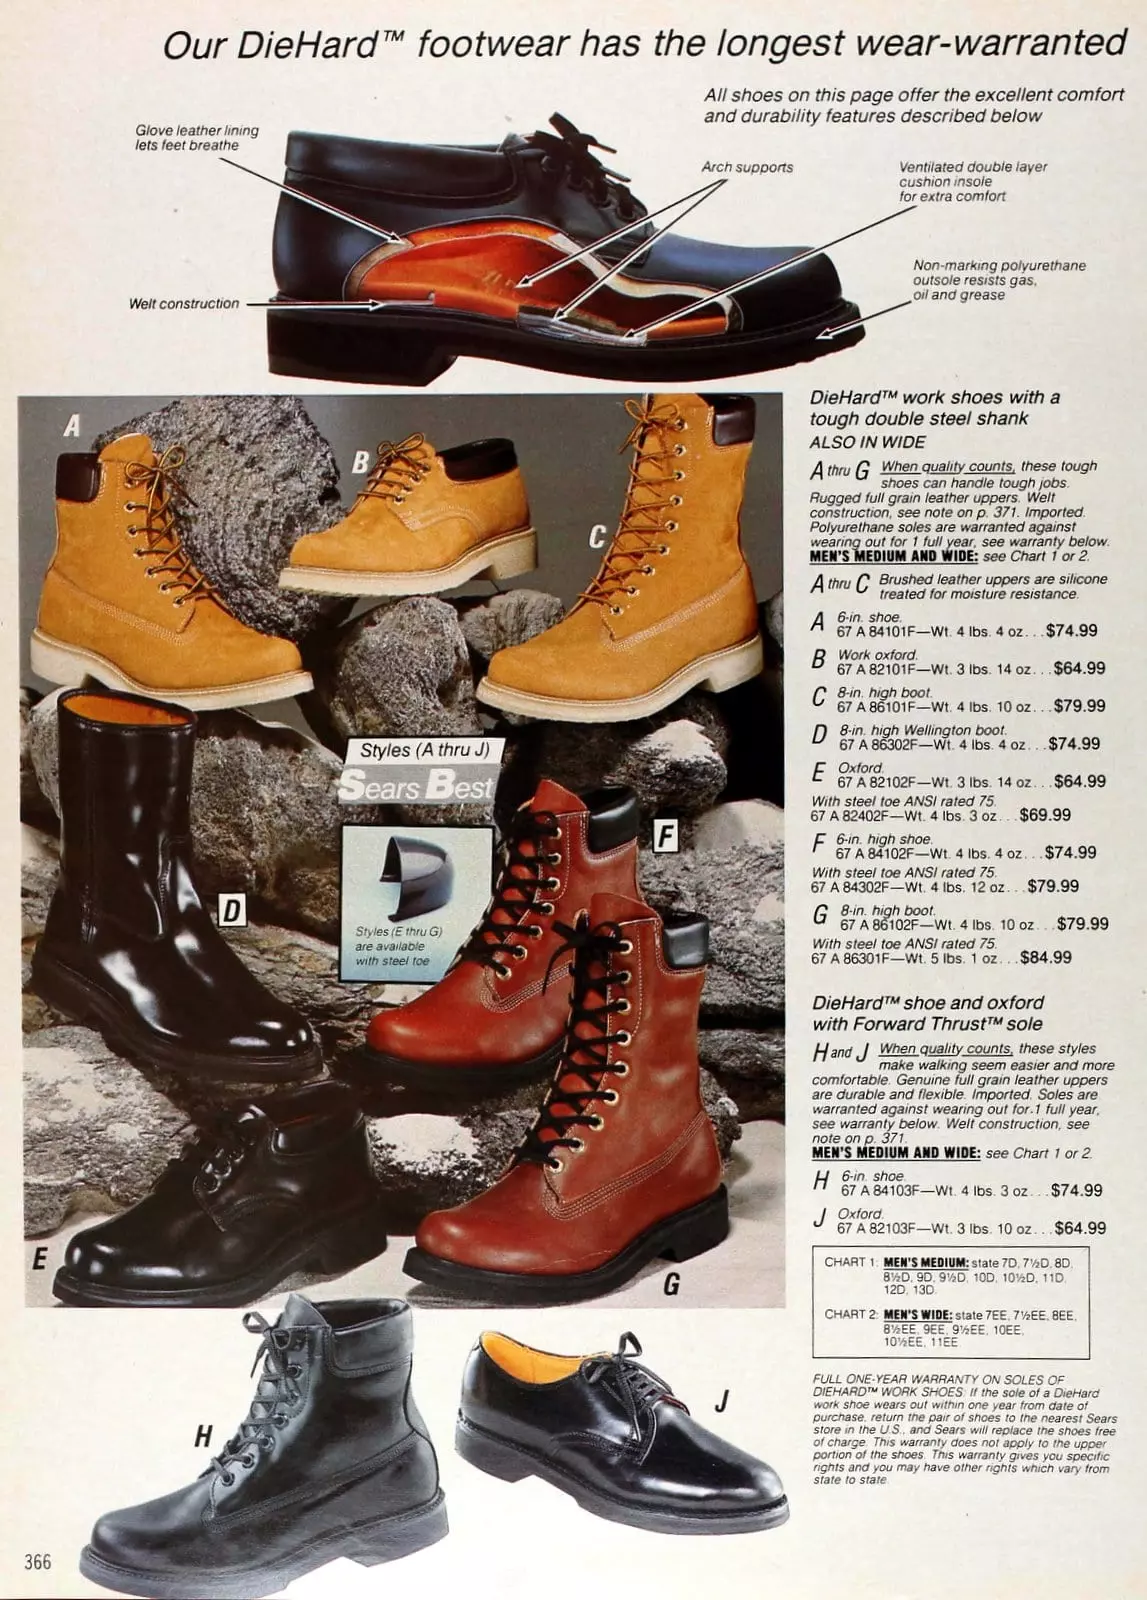 Vintage 80s shoes for men from 1985 (4)